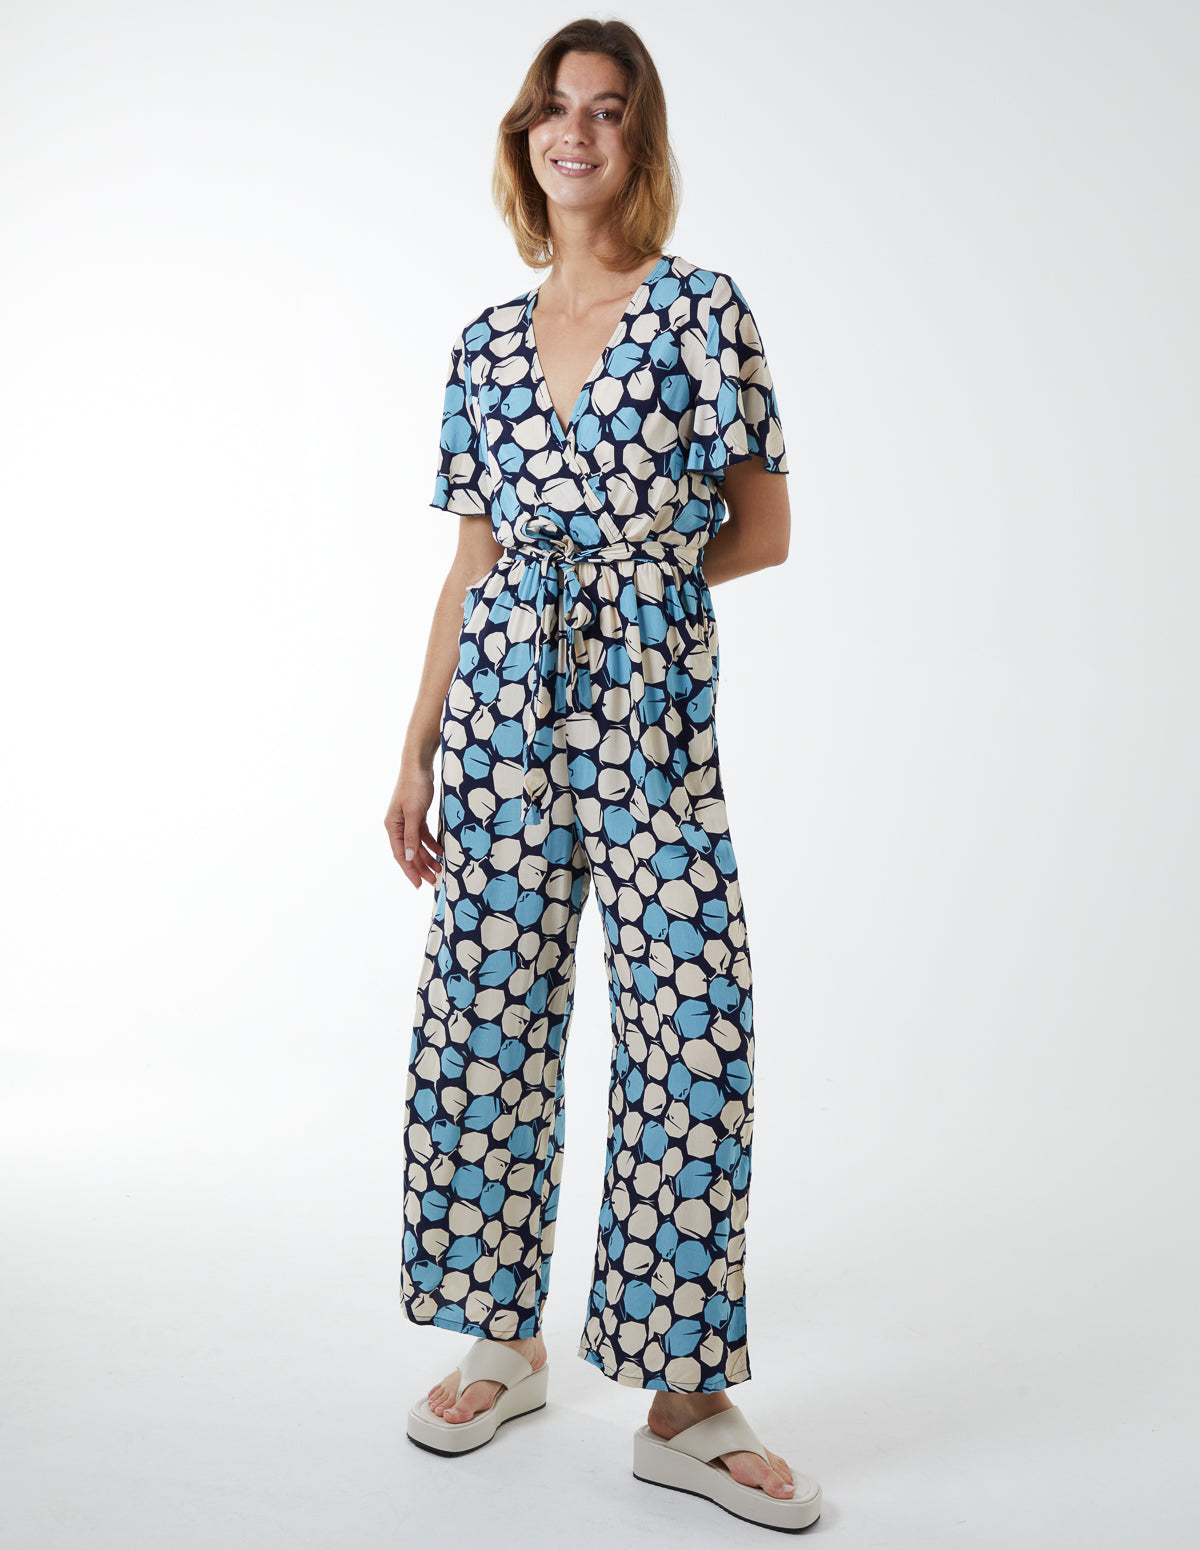 Abstract Honeycomb Cross Over Jumpsuit - L / BLUE